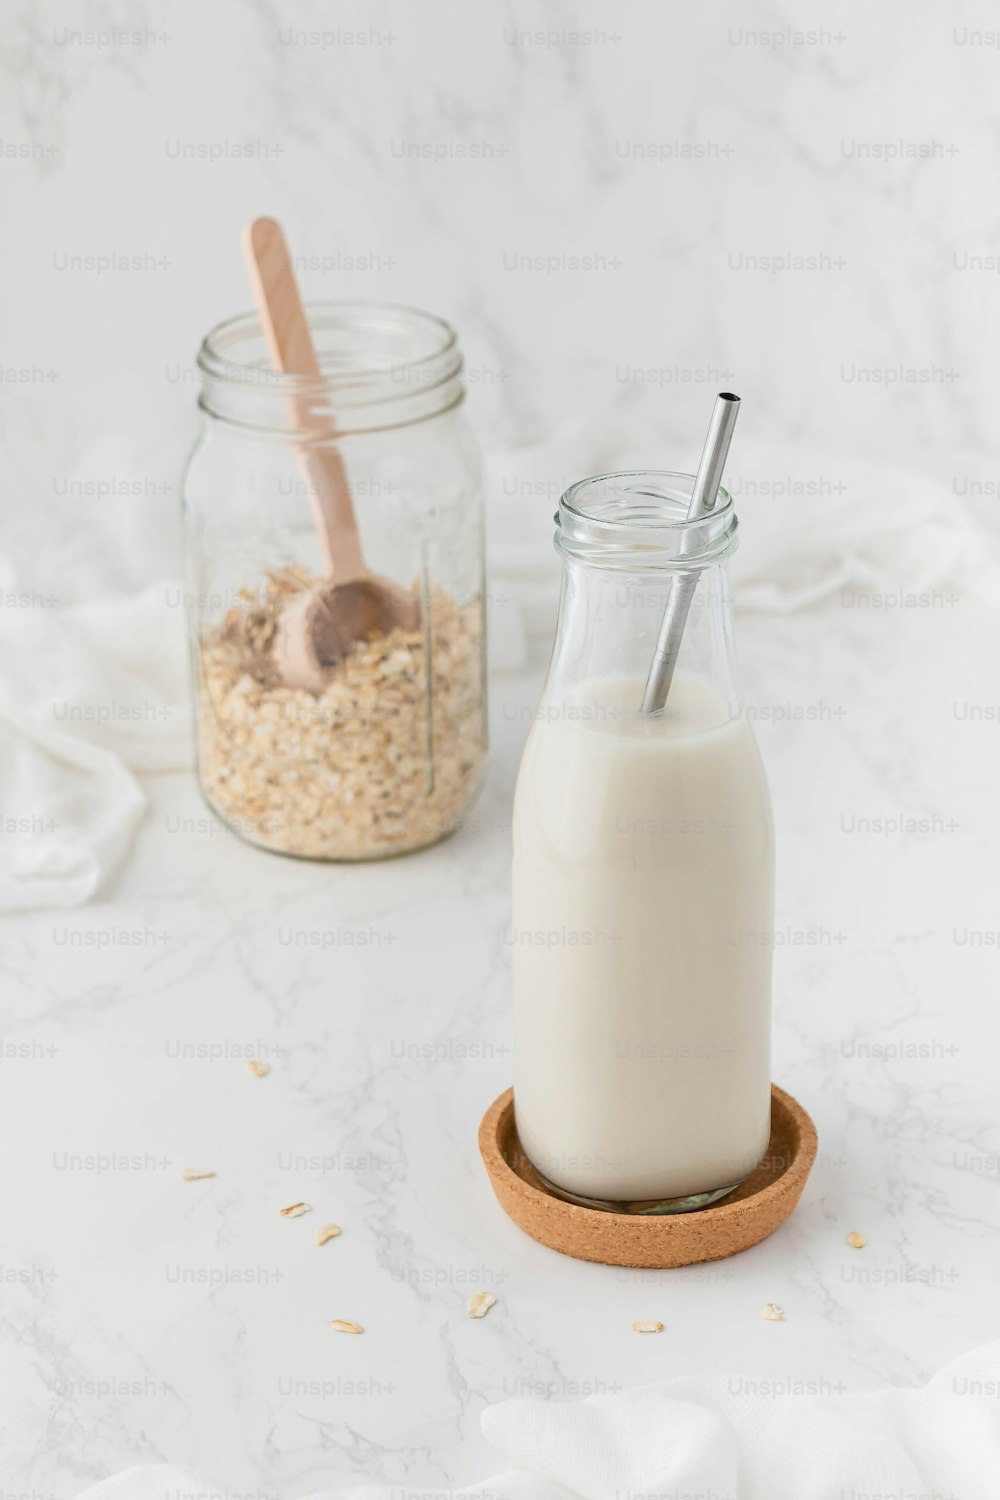 a glass of milk next to a jar of oatmeal